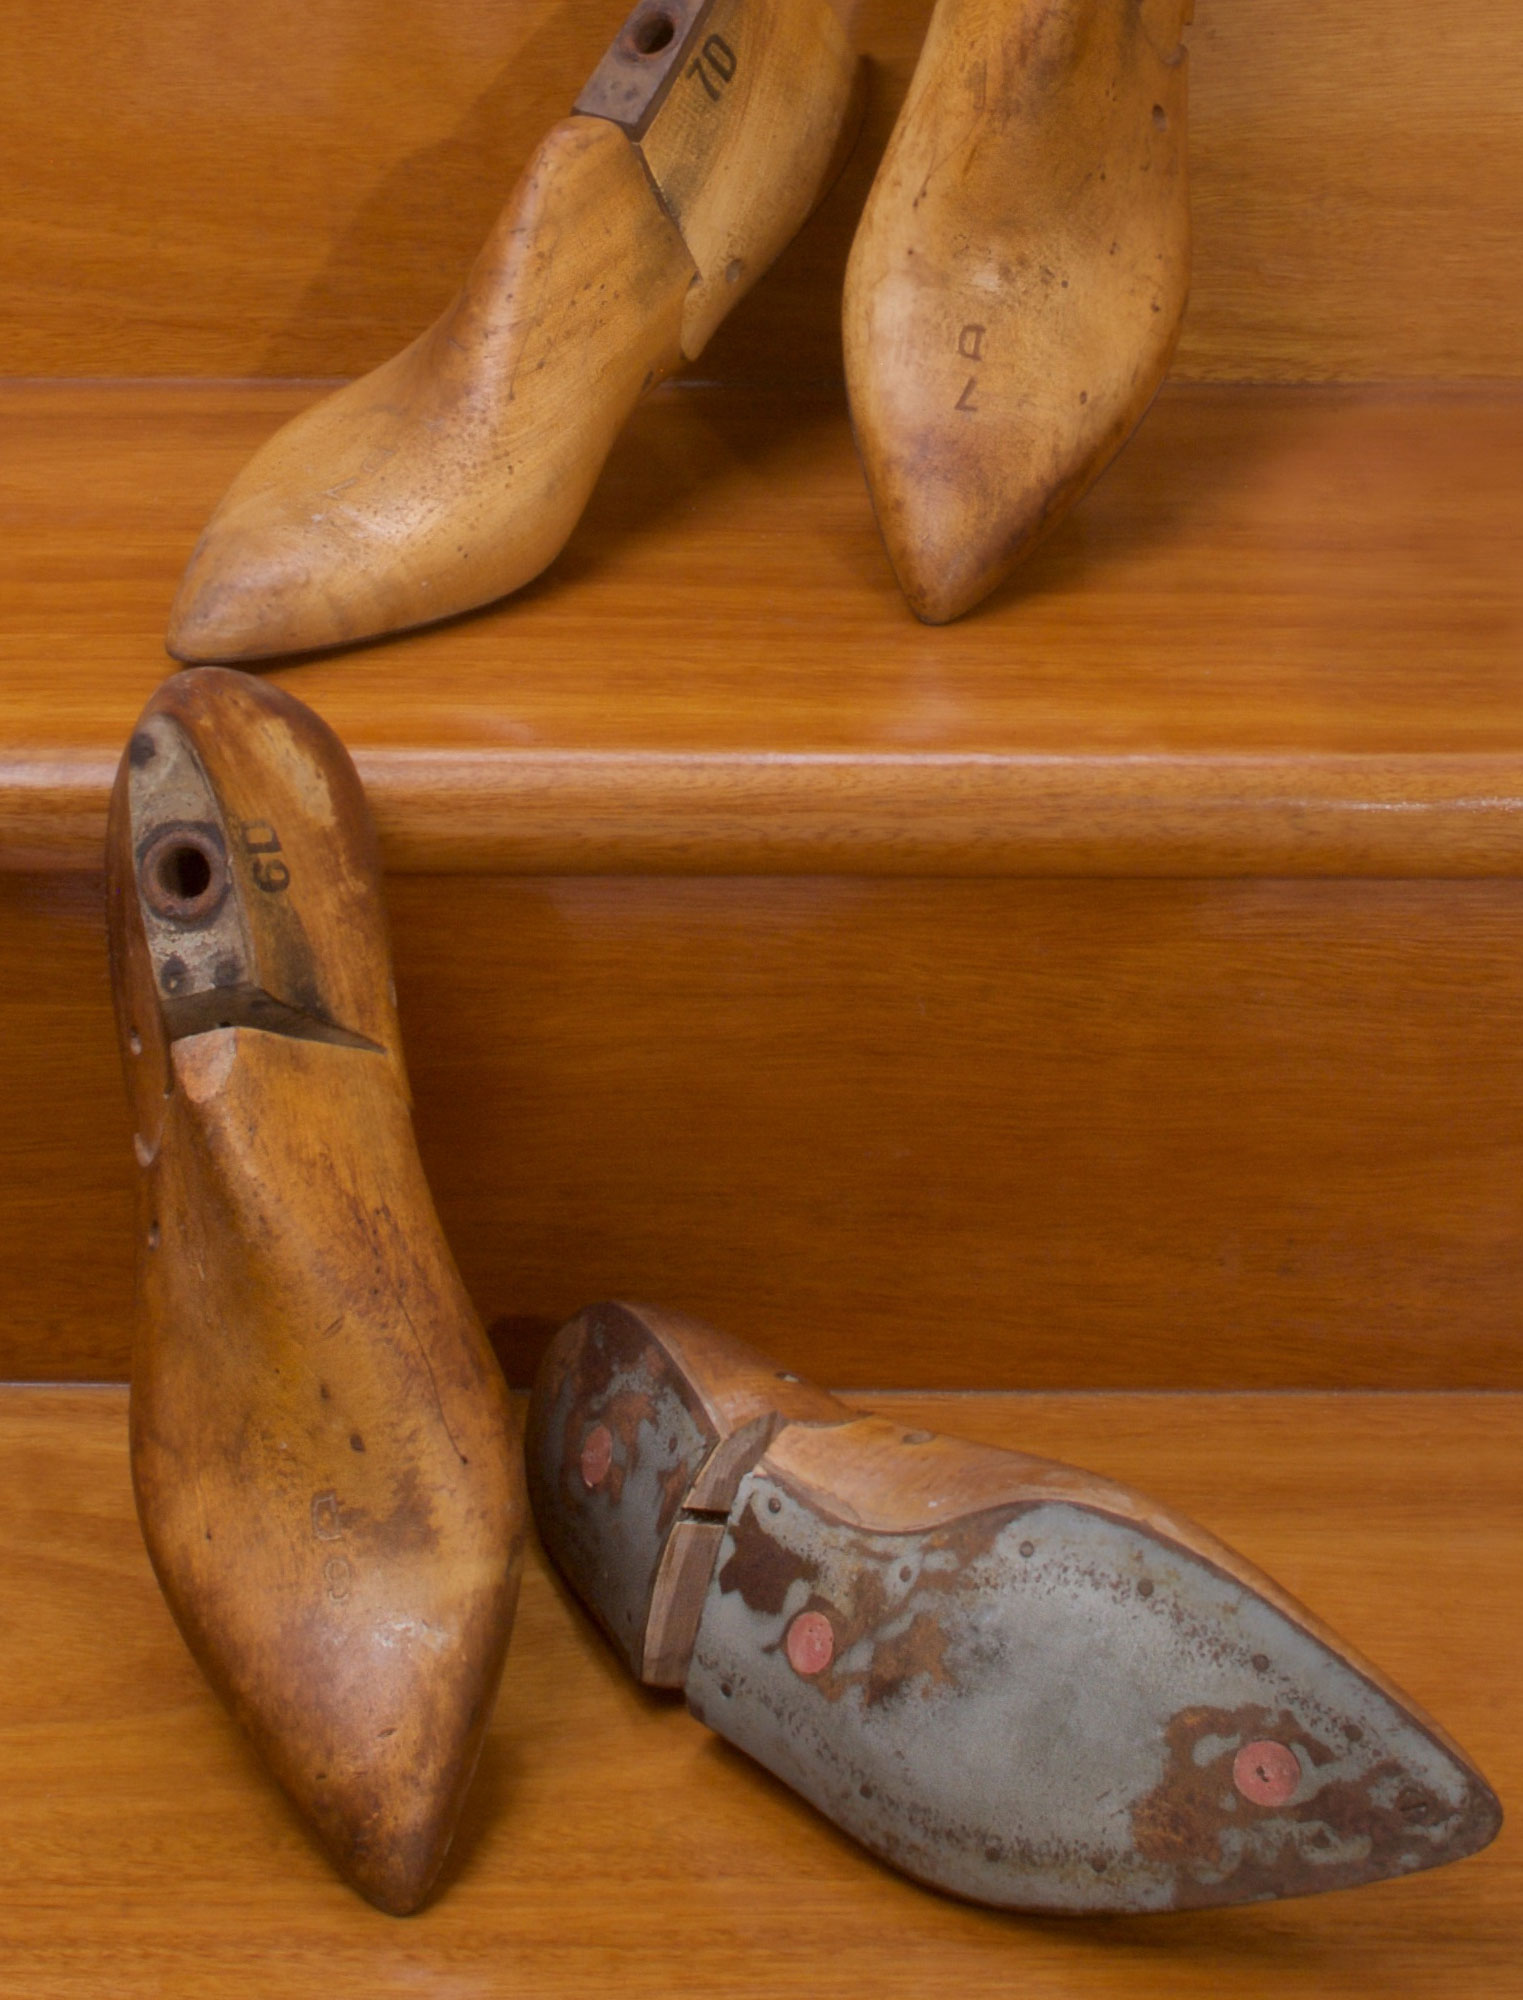 BEAUTIFUL PAIRS OF VINTAGE HAND-CRAFTED, BESPOKE WOODEN SHOE LASTS 